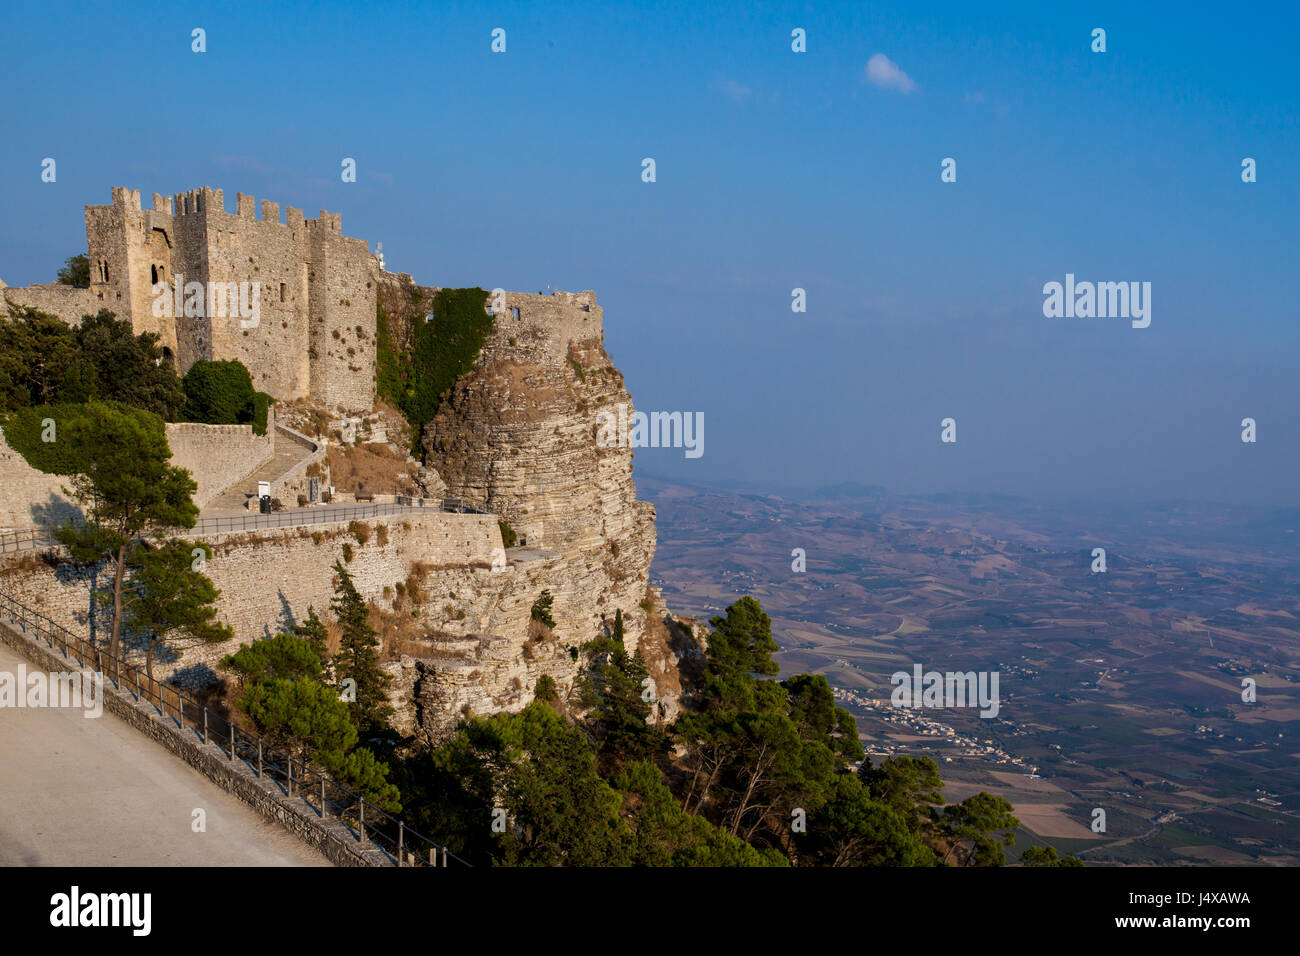 Historic castle of Venice  in Erice, Sicily sits high above the city below Stock Photo